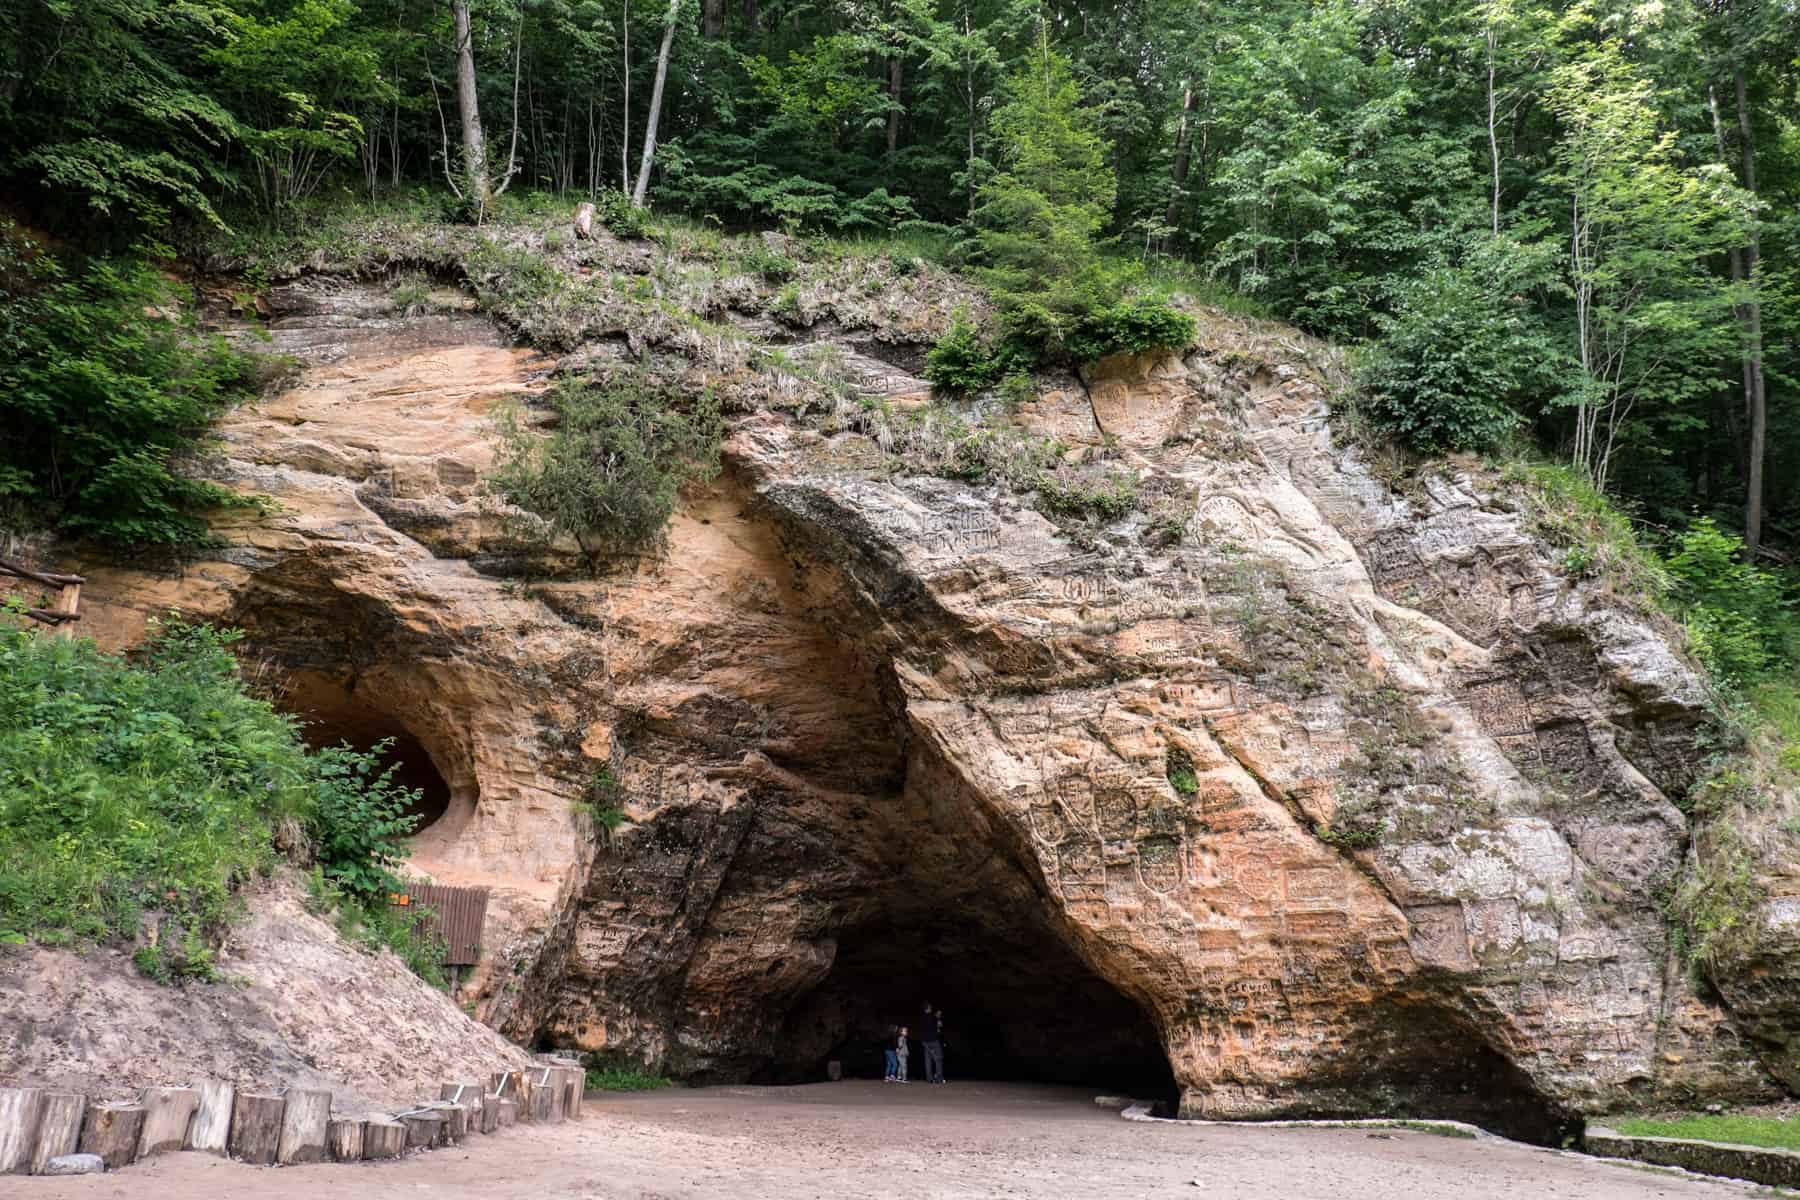 A large, honey coloured cave - Gutman's Cave in Sigulda, Latvia – is covered in carved inscriptions. Green forest grows on top and next to it.